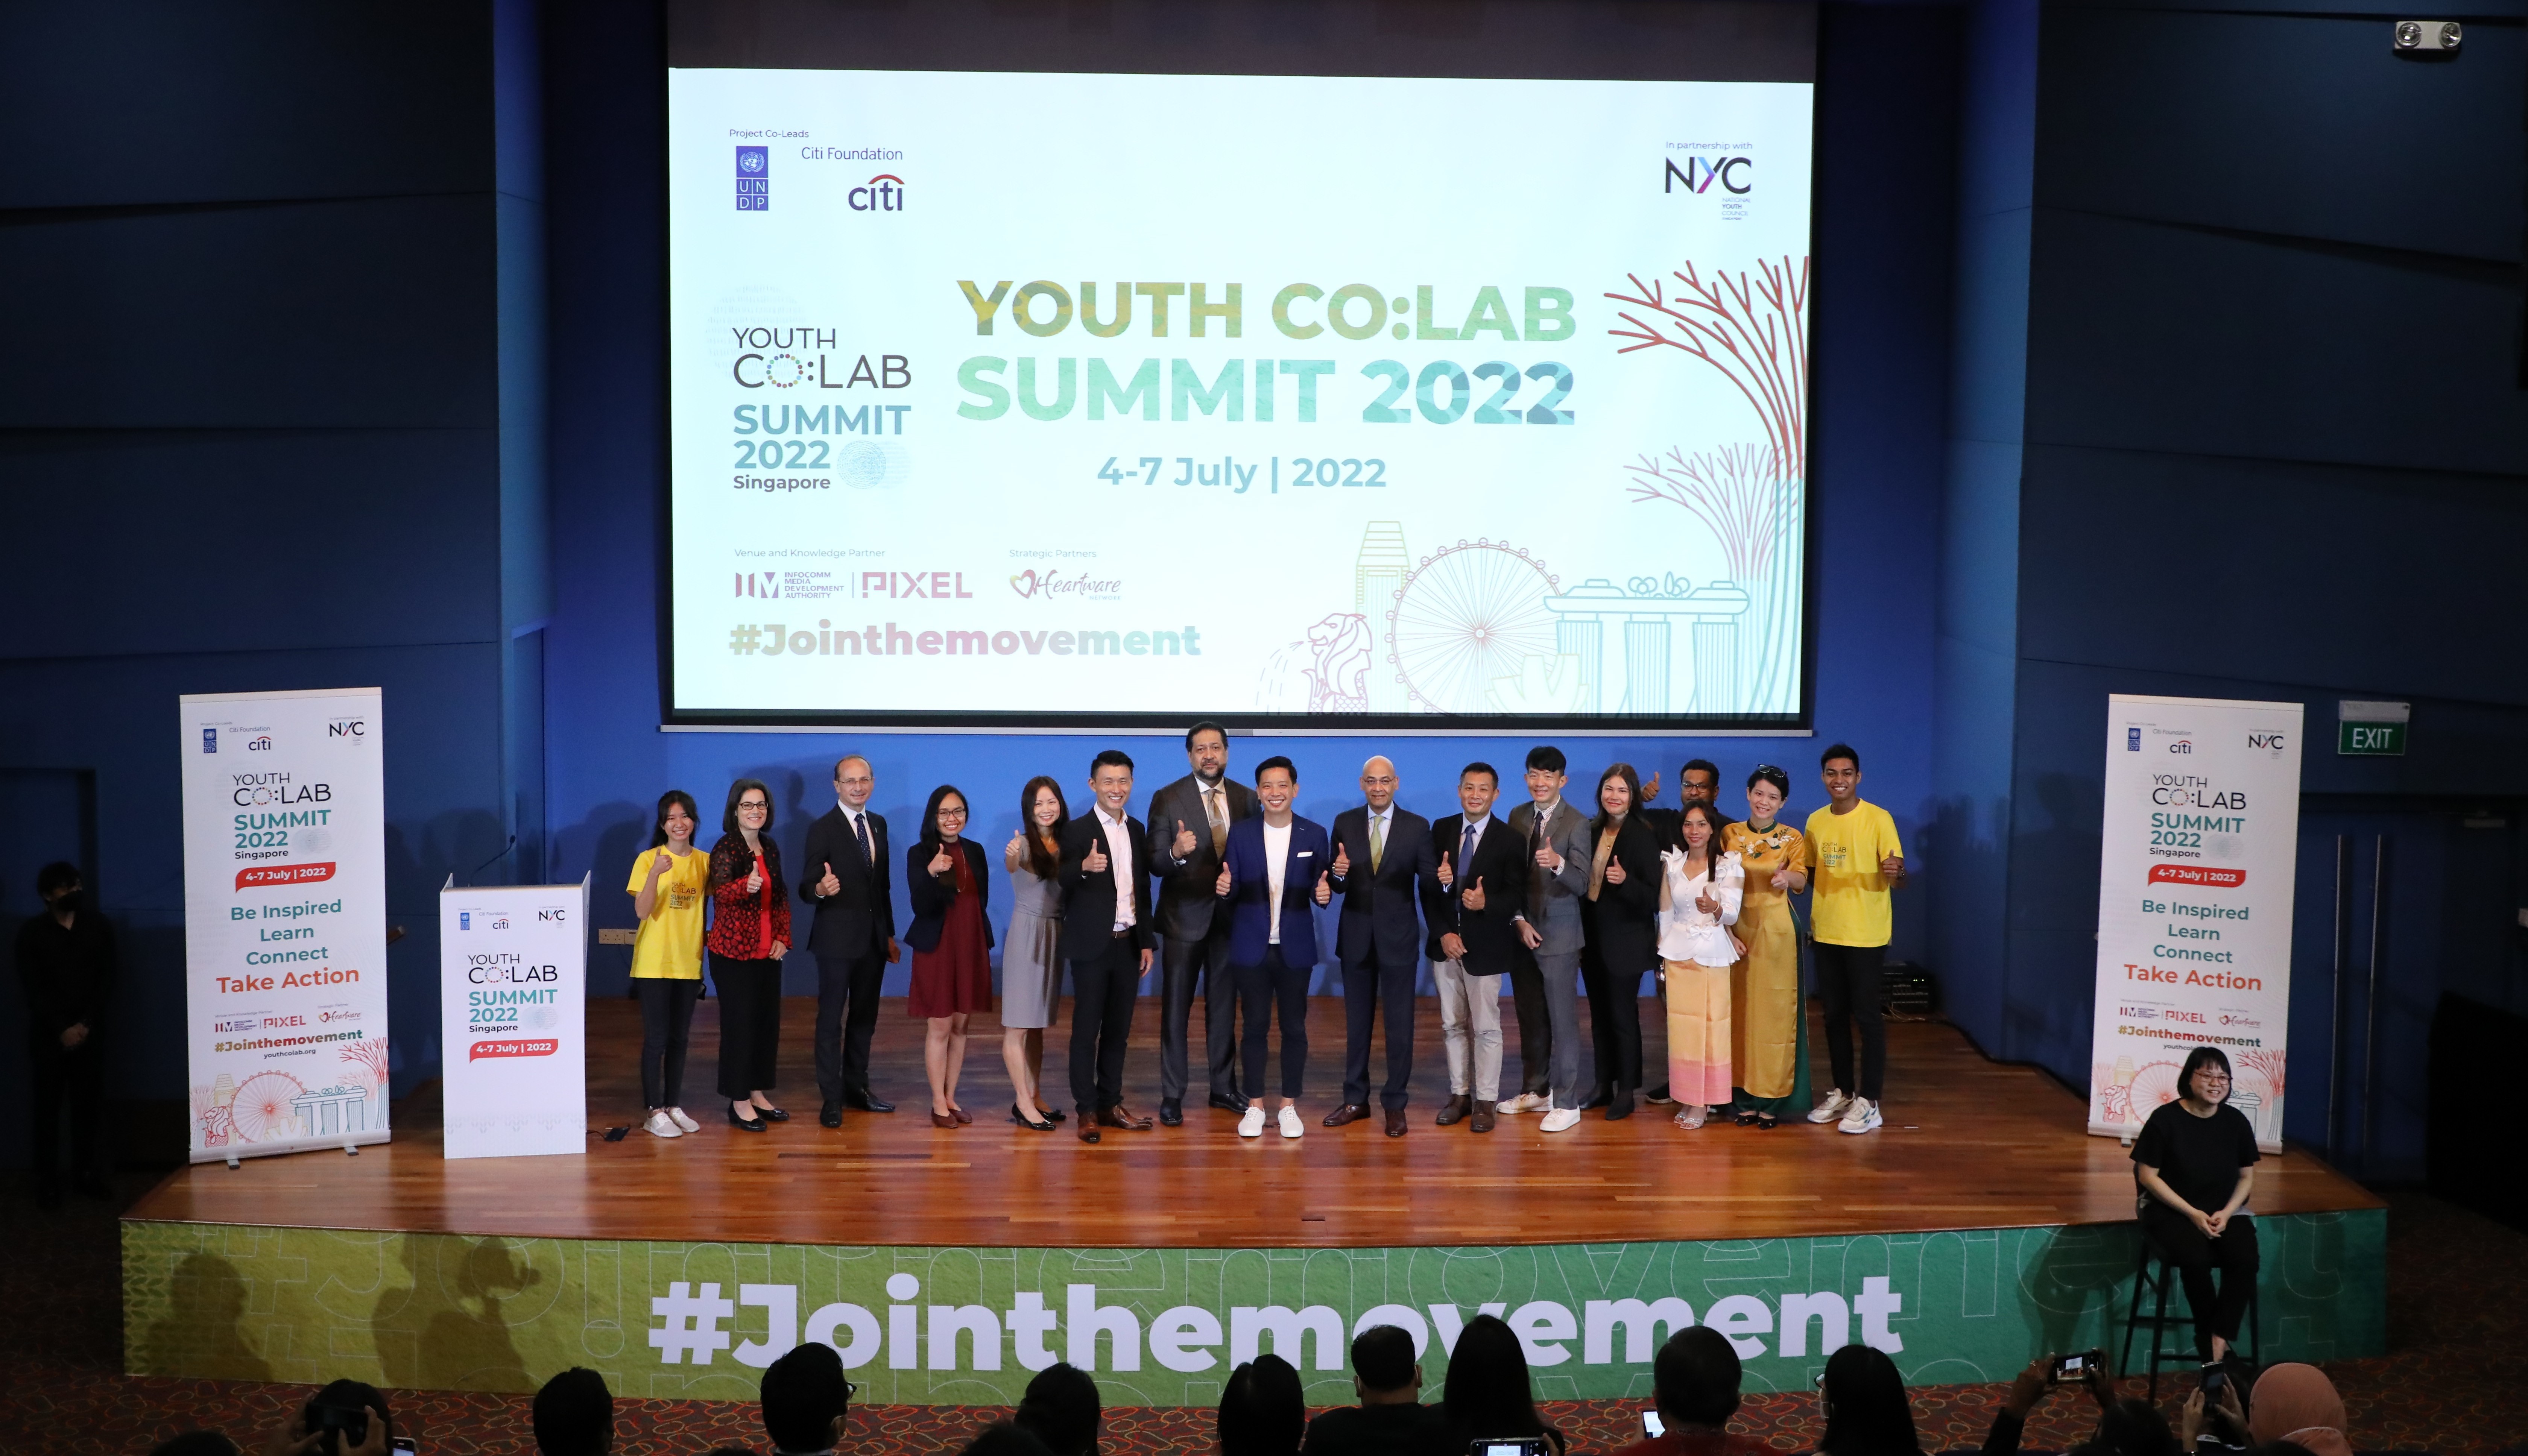 Dignitaries and guests-of-honour at the Opening Ceremony of the Youth CoLab Summit